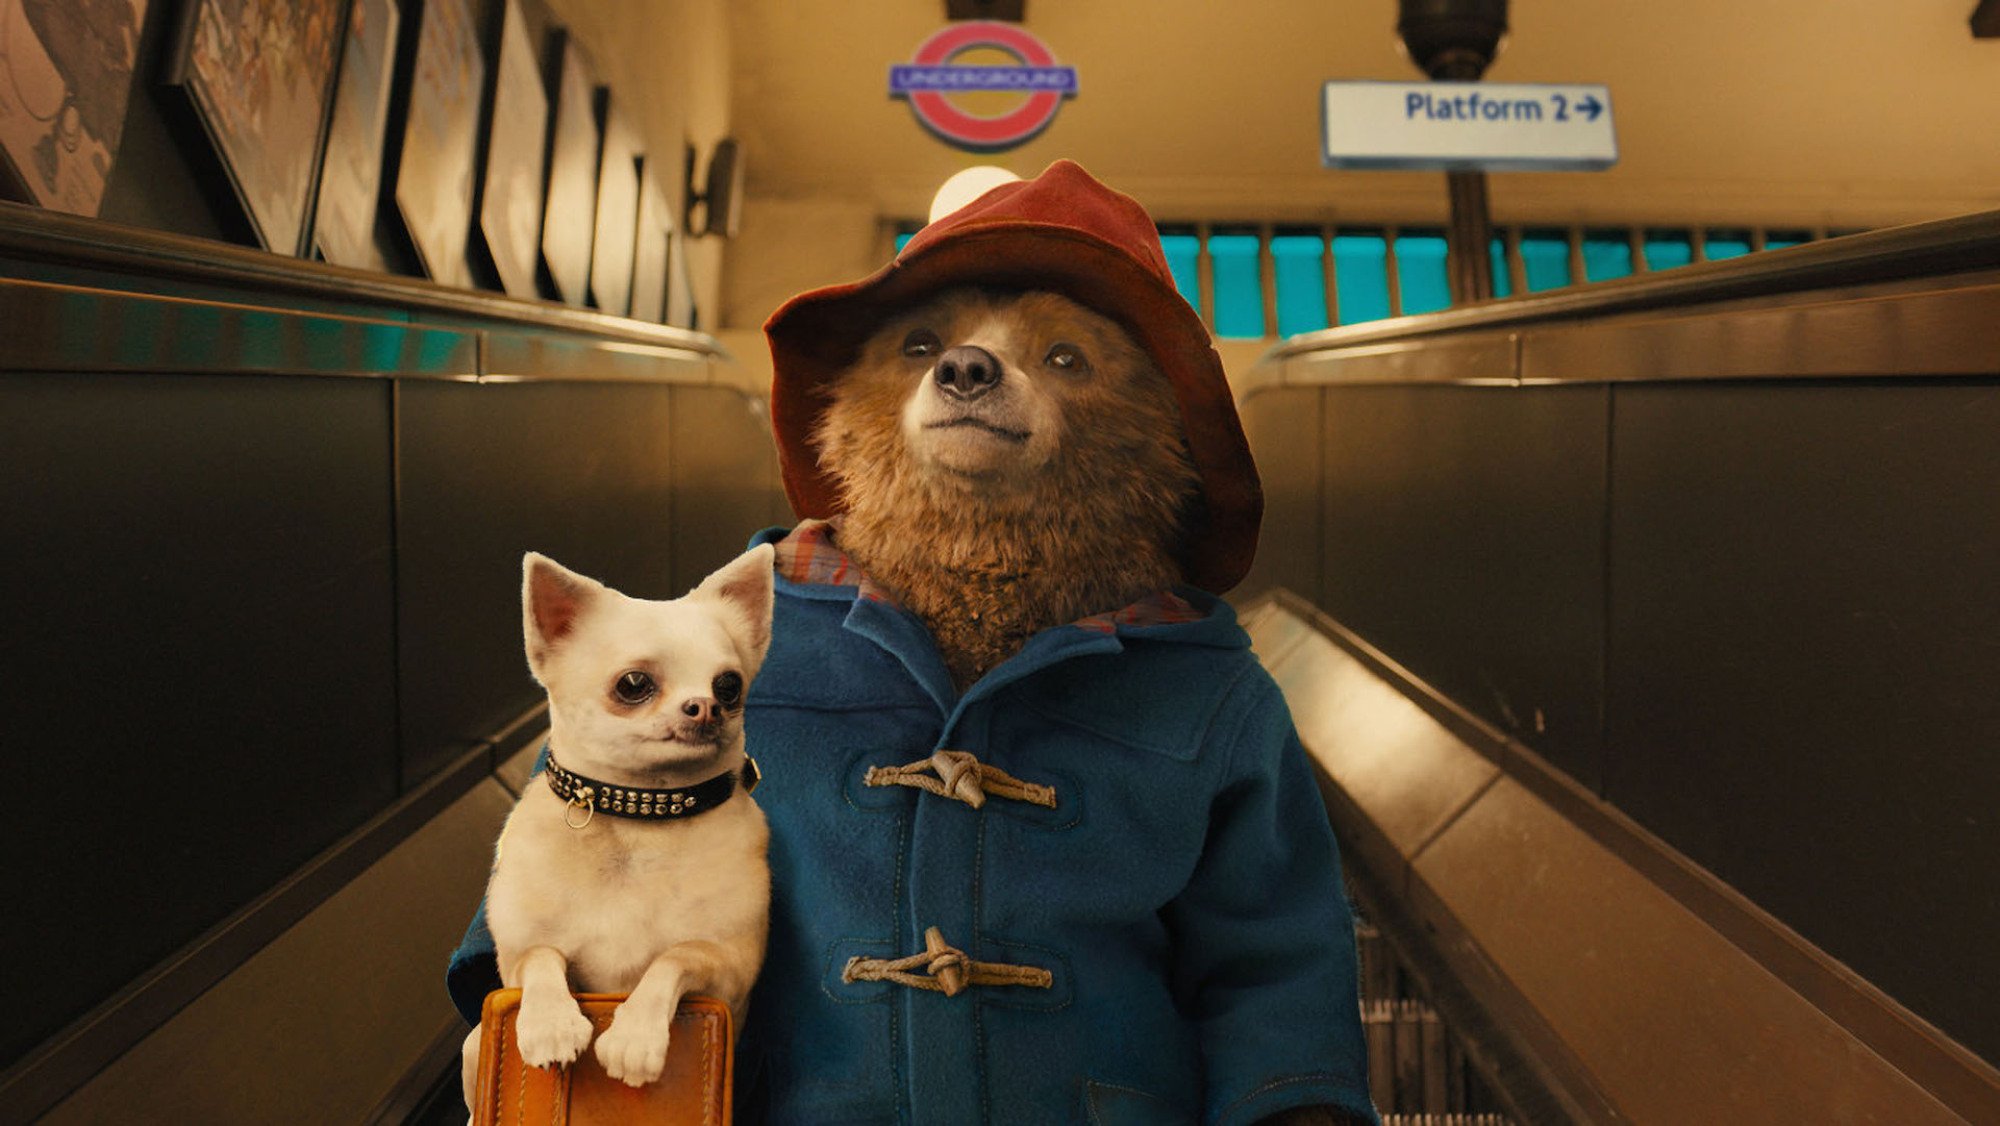 A bear in a red hat and blue coat holds a small dog and a bag as they go down an escalator.